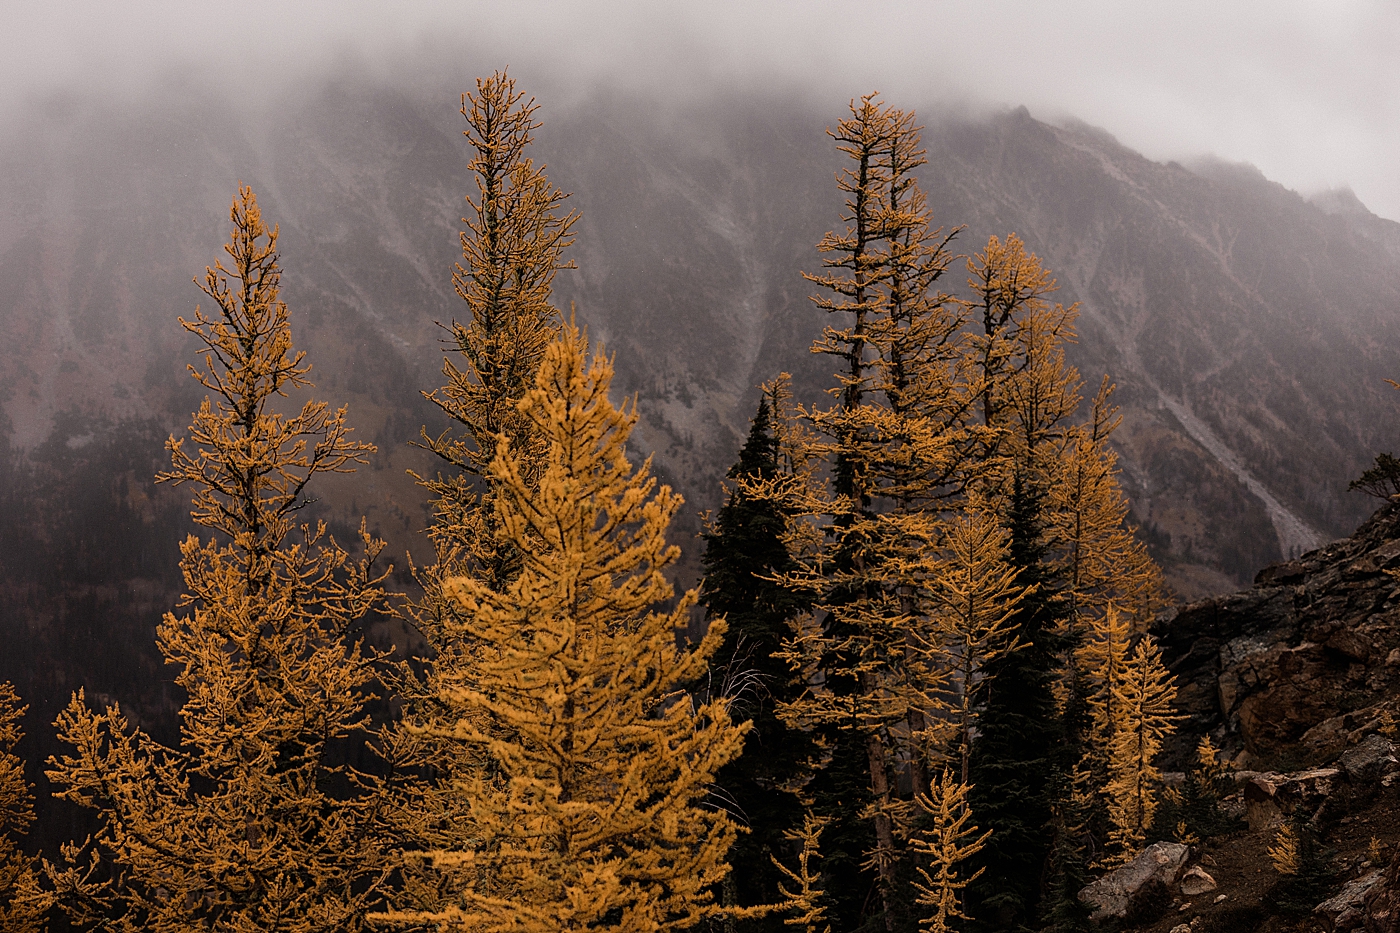 Larches in Central Washington. Photo by Megan Montalvo Photography.